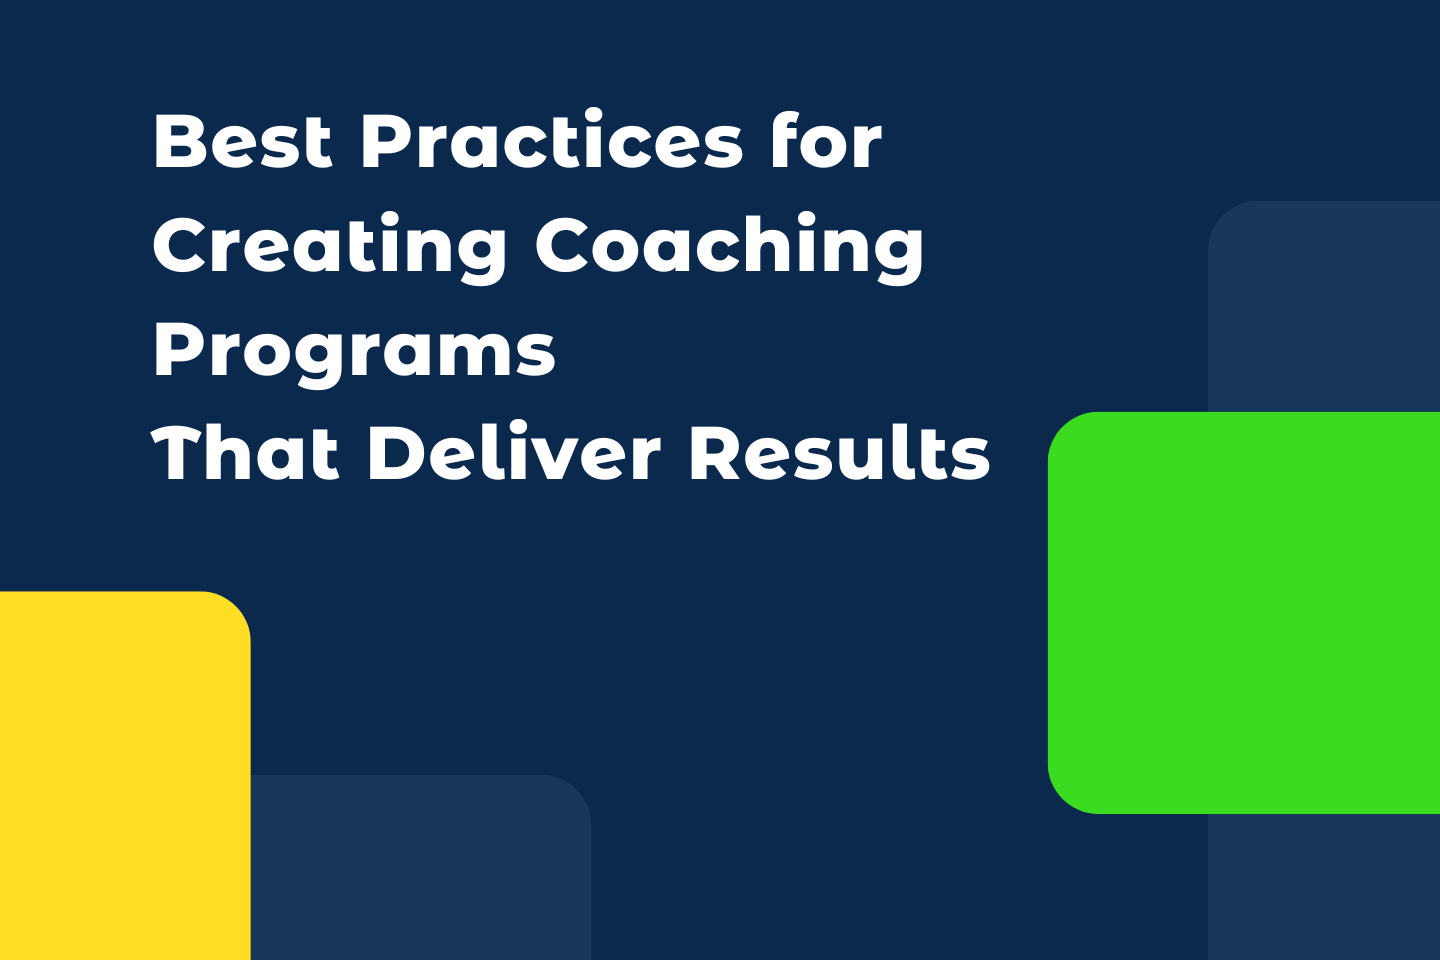 Best Practices for Creating Coaching Programs That Deliver Results